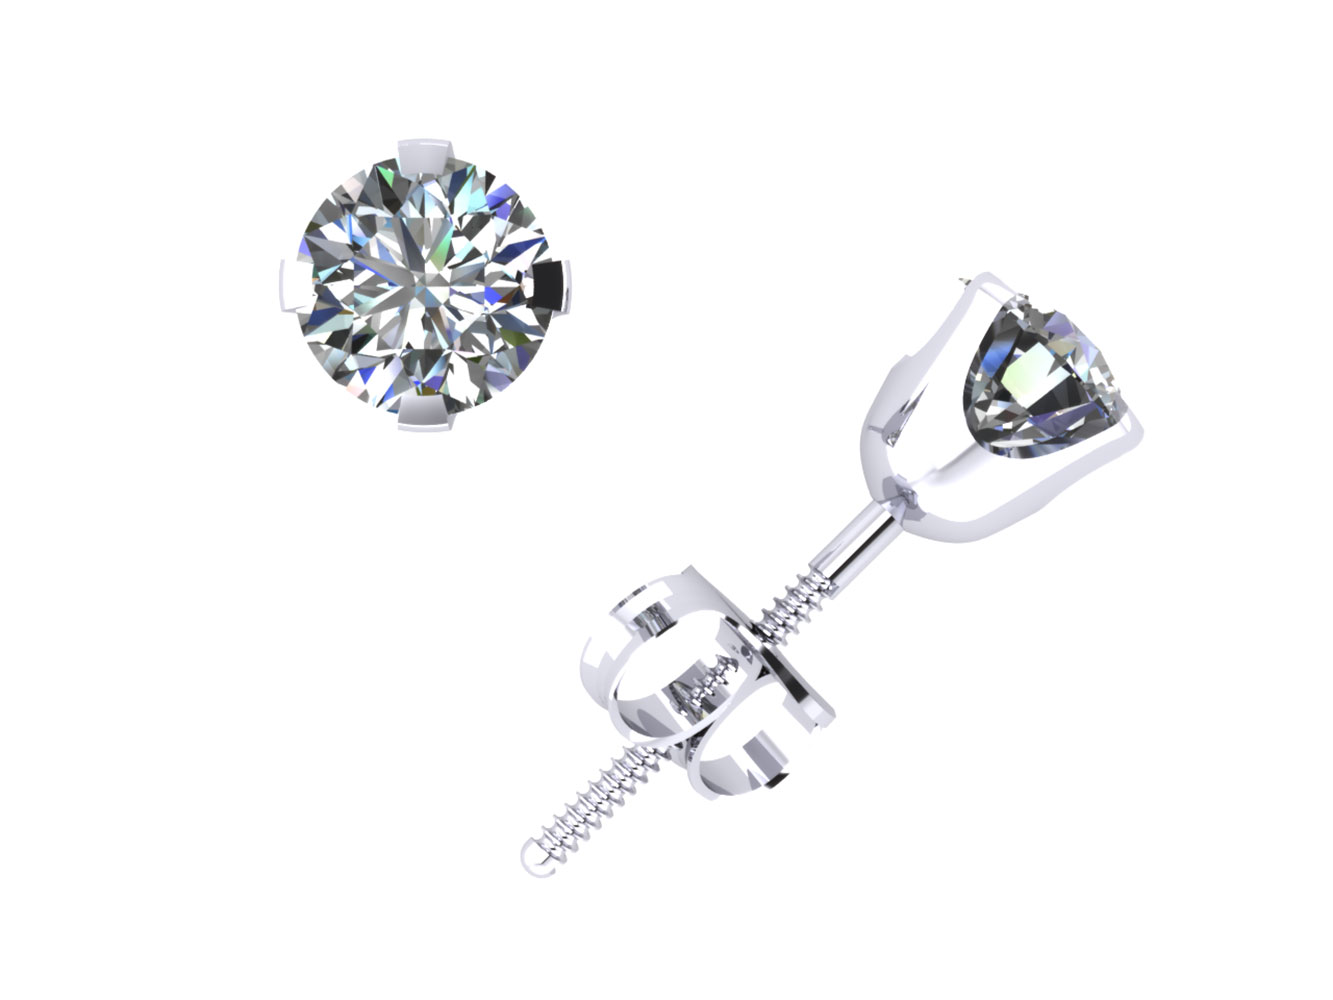 Jewel We Sell 0.50Ct Round Cut Diamond Solitaire Stud Earrings 14k White or Yellow Gold 4Prong ScrewBack H SI2